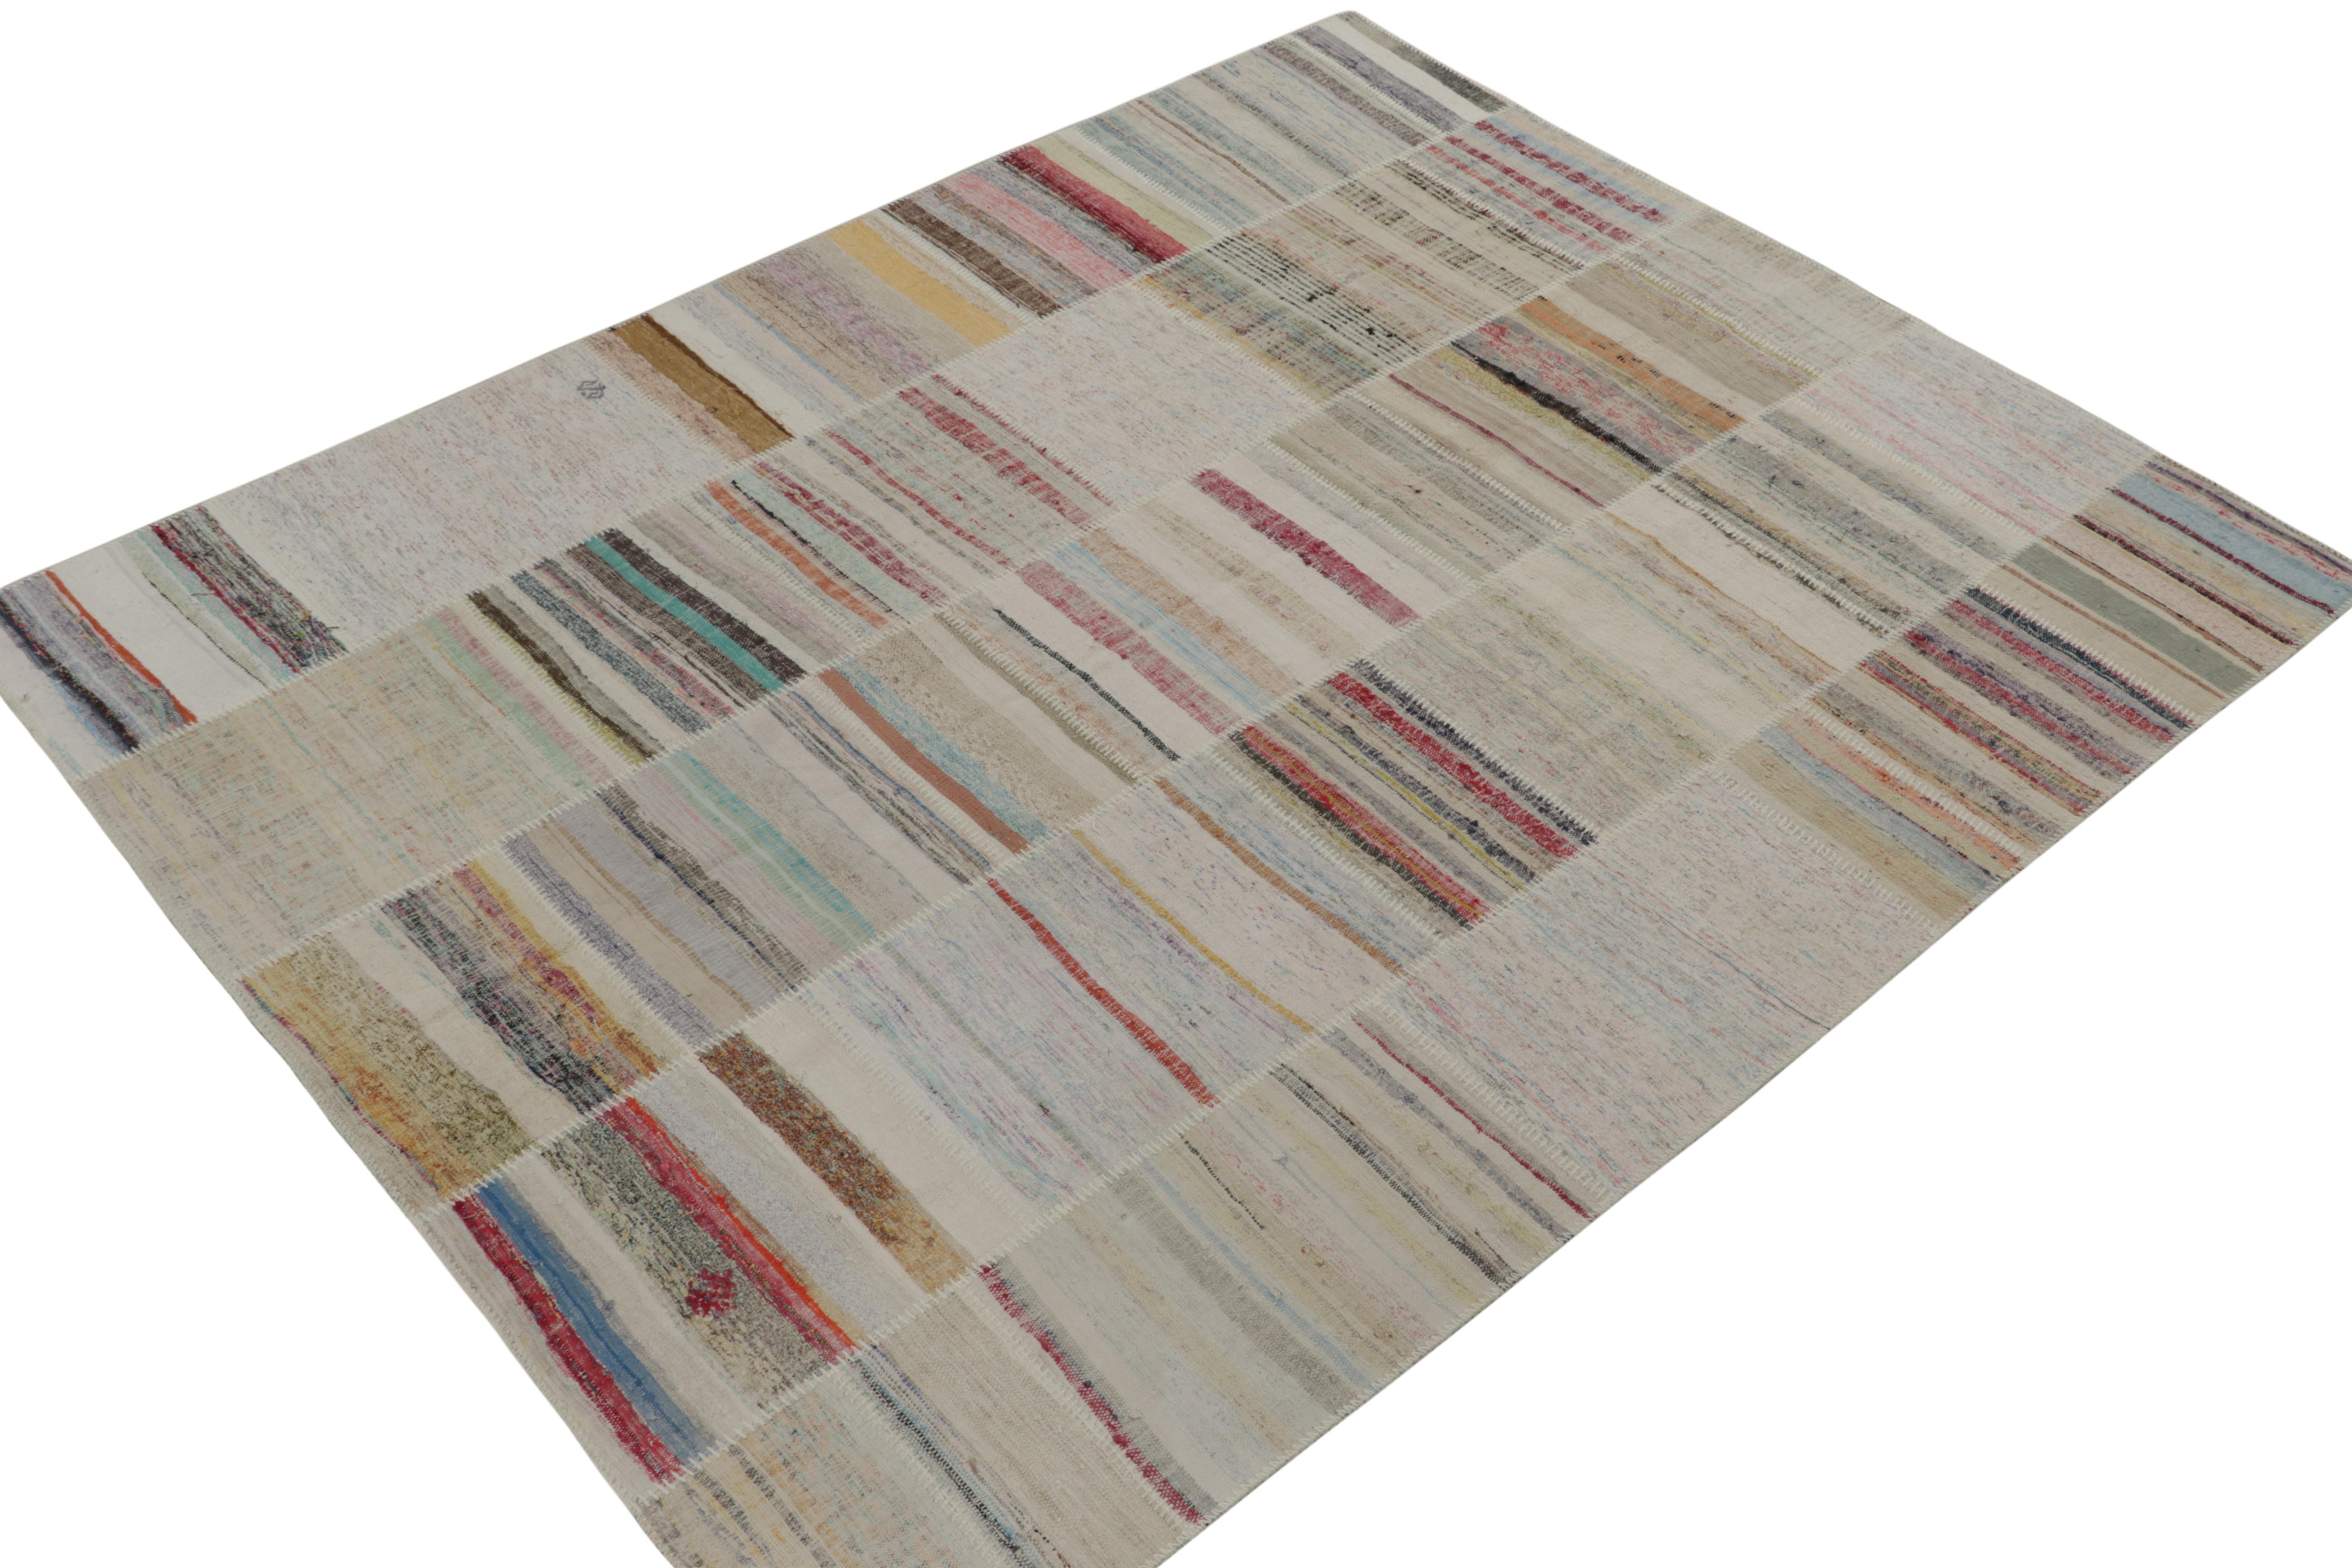 Handwoven in wool, Rug & Kilim presents a spacious 8x10 contemporary rug from their innovative new patchwork kilim collection. 

On the Design: 

This flat weave technique repurposes vintage yarns in polychromatic stripes and striae, achieving a